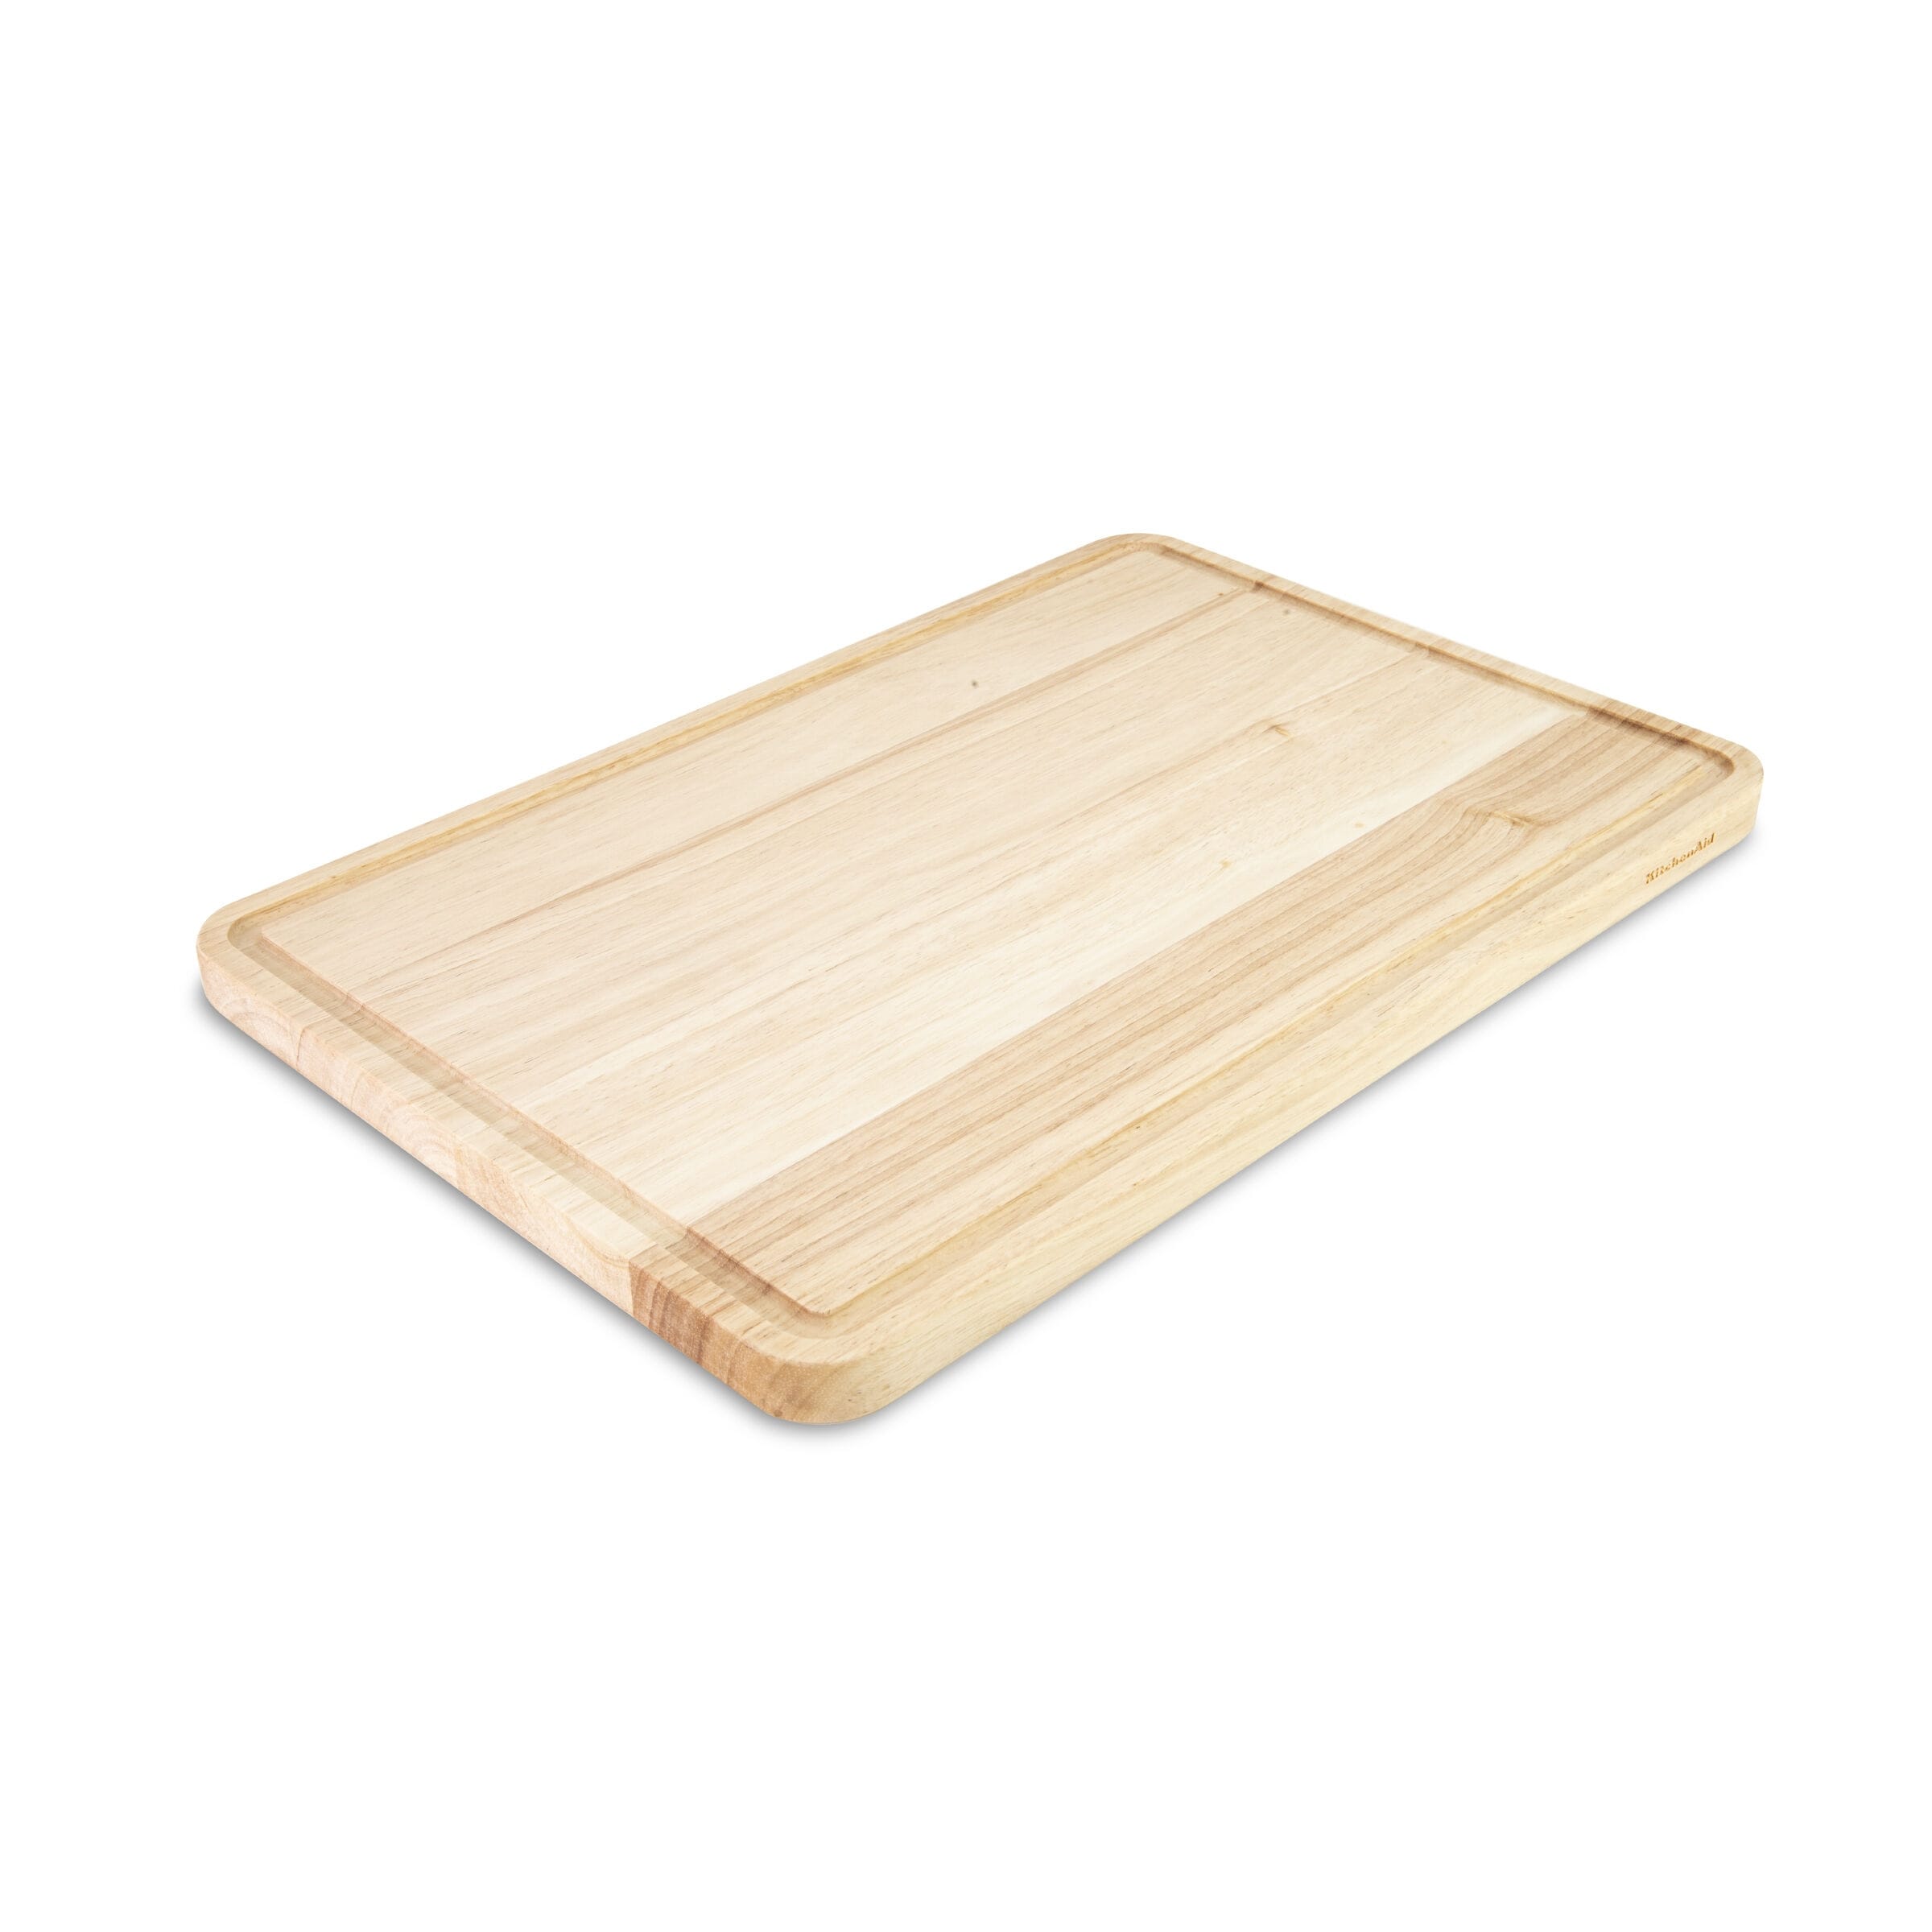 https://ak1.ostkcdn.com/images/products/is/images/direct/e0c74e5b0469e6fc842598a0bf5a22c4fa8cb60f/KitchenAid-Classic-Wood-Cutting-Board%2C-12x18-Inch%2C-Natural.jpg